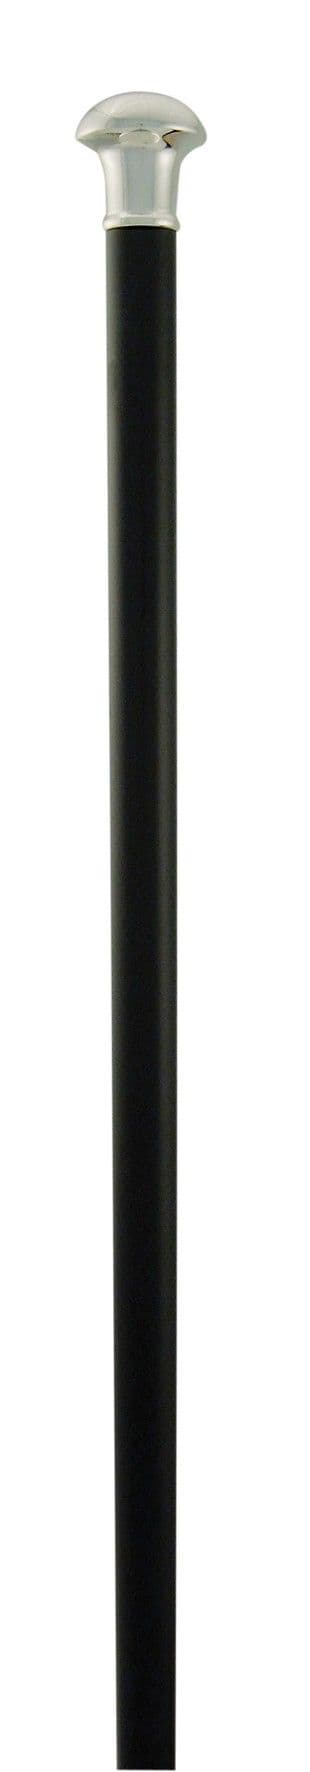 Classic Canes Silver plated formal cap stick on black hardwood shaft